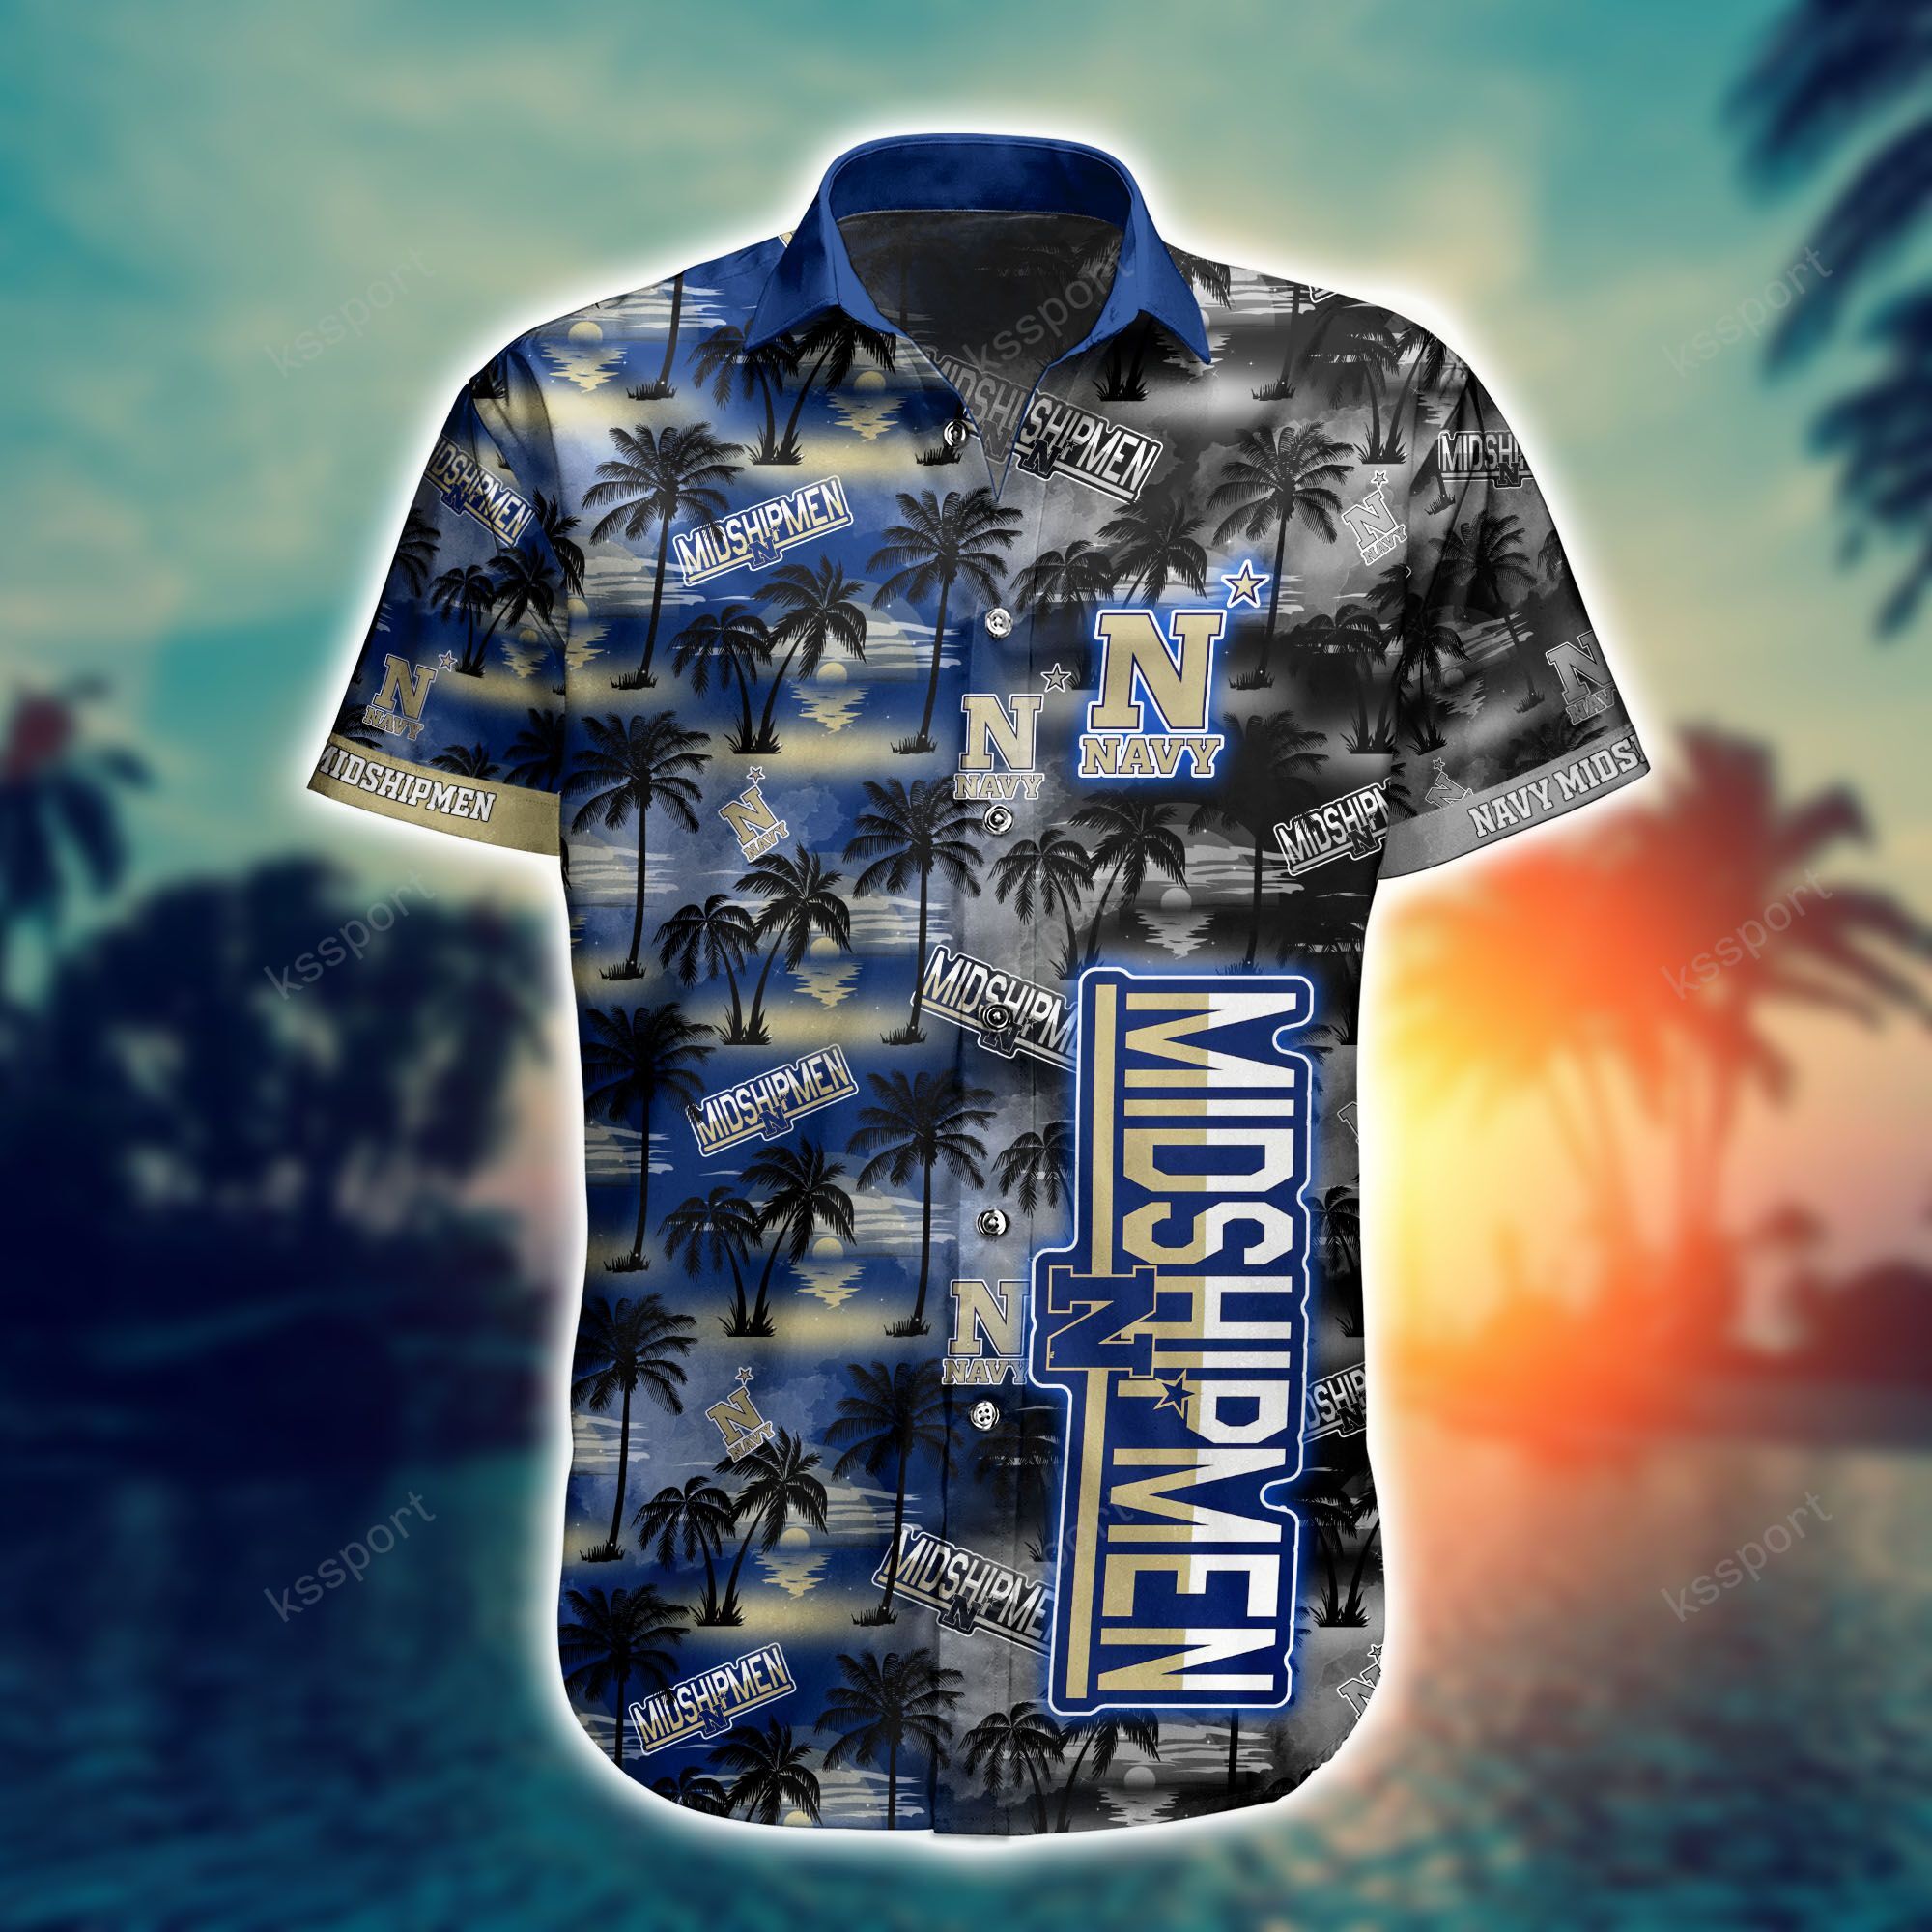 Top cool Hawaiian shirt 2022 - Make sure you get yours today before they run out! 154